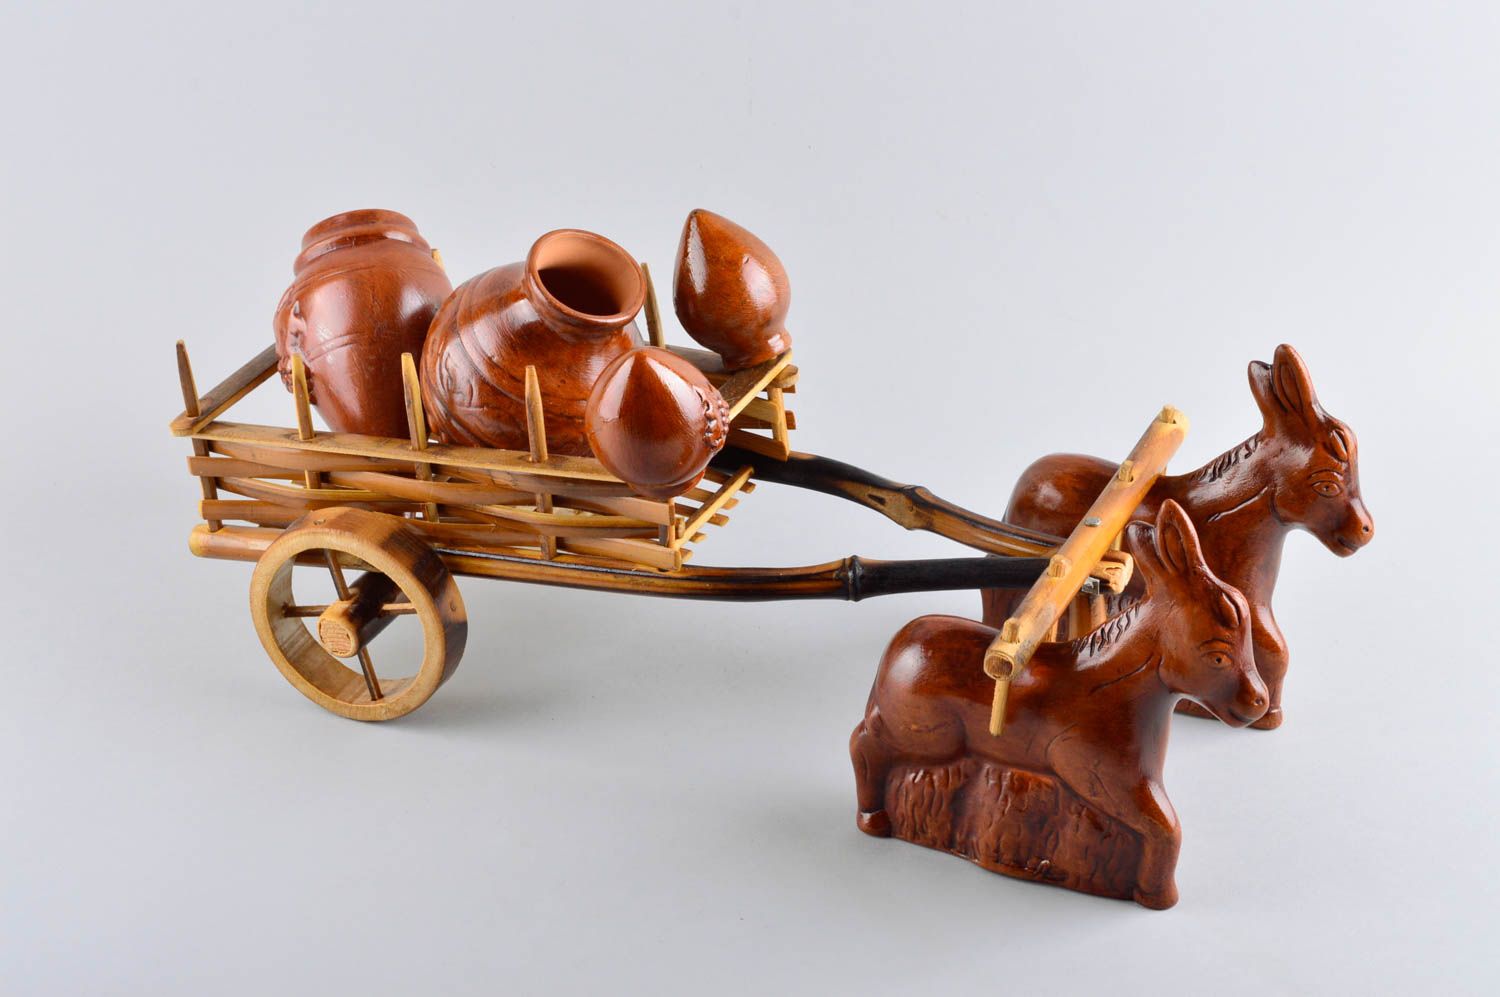 Salt and pepper shakers' decorative set for table décor in the shape of mule cart 4 lb photo 2